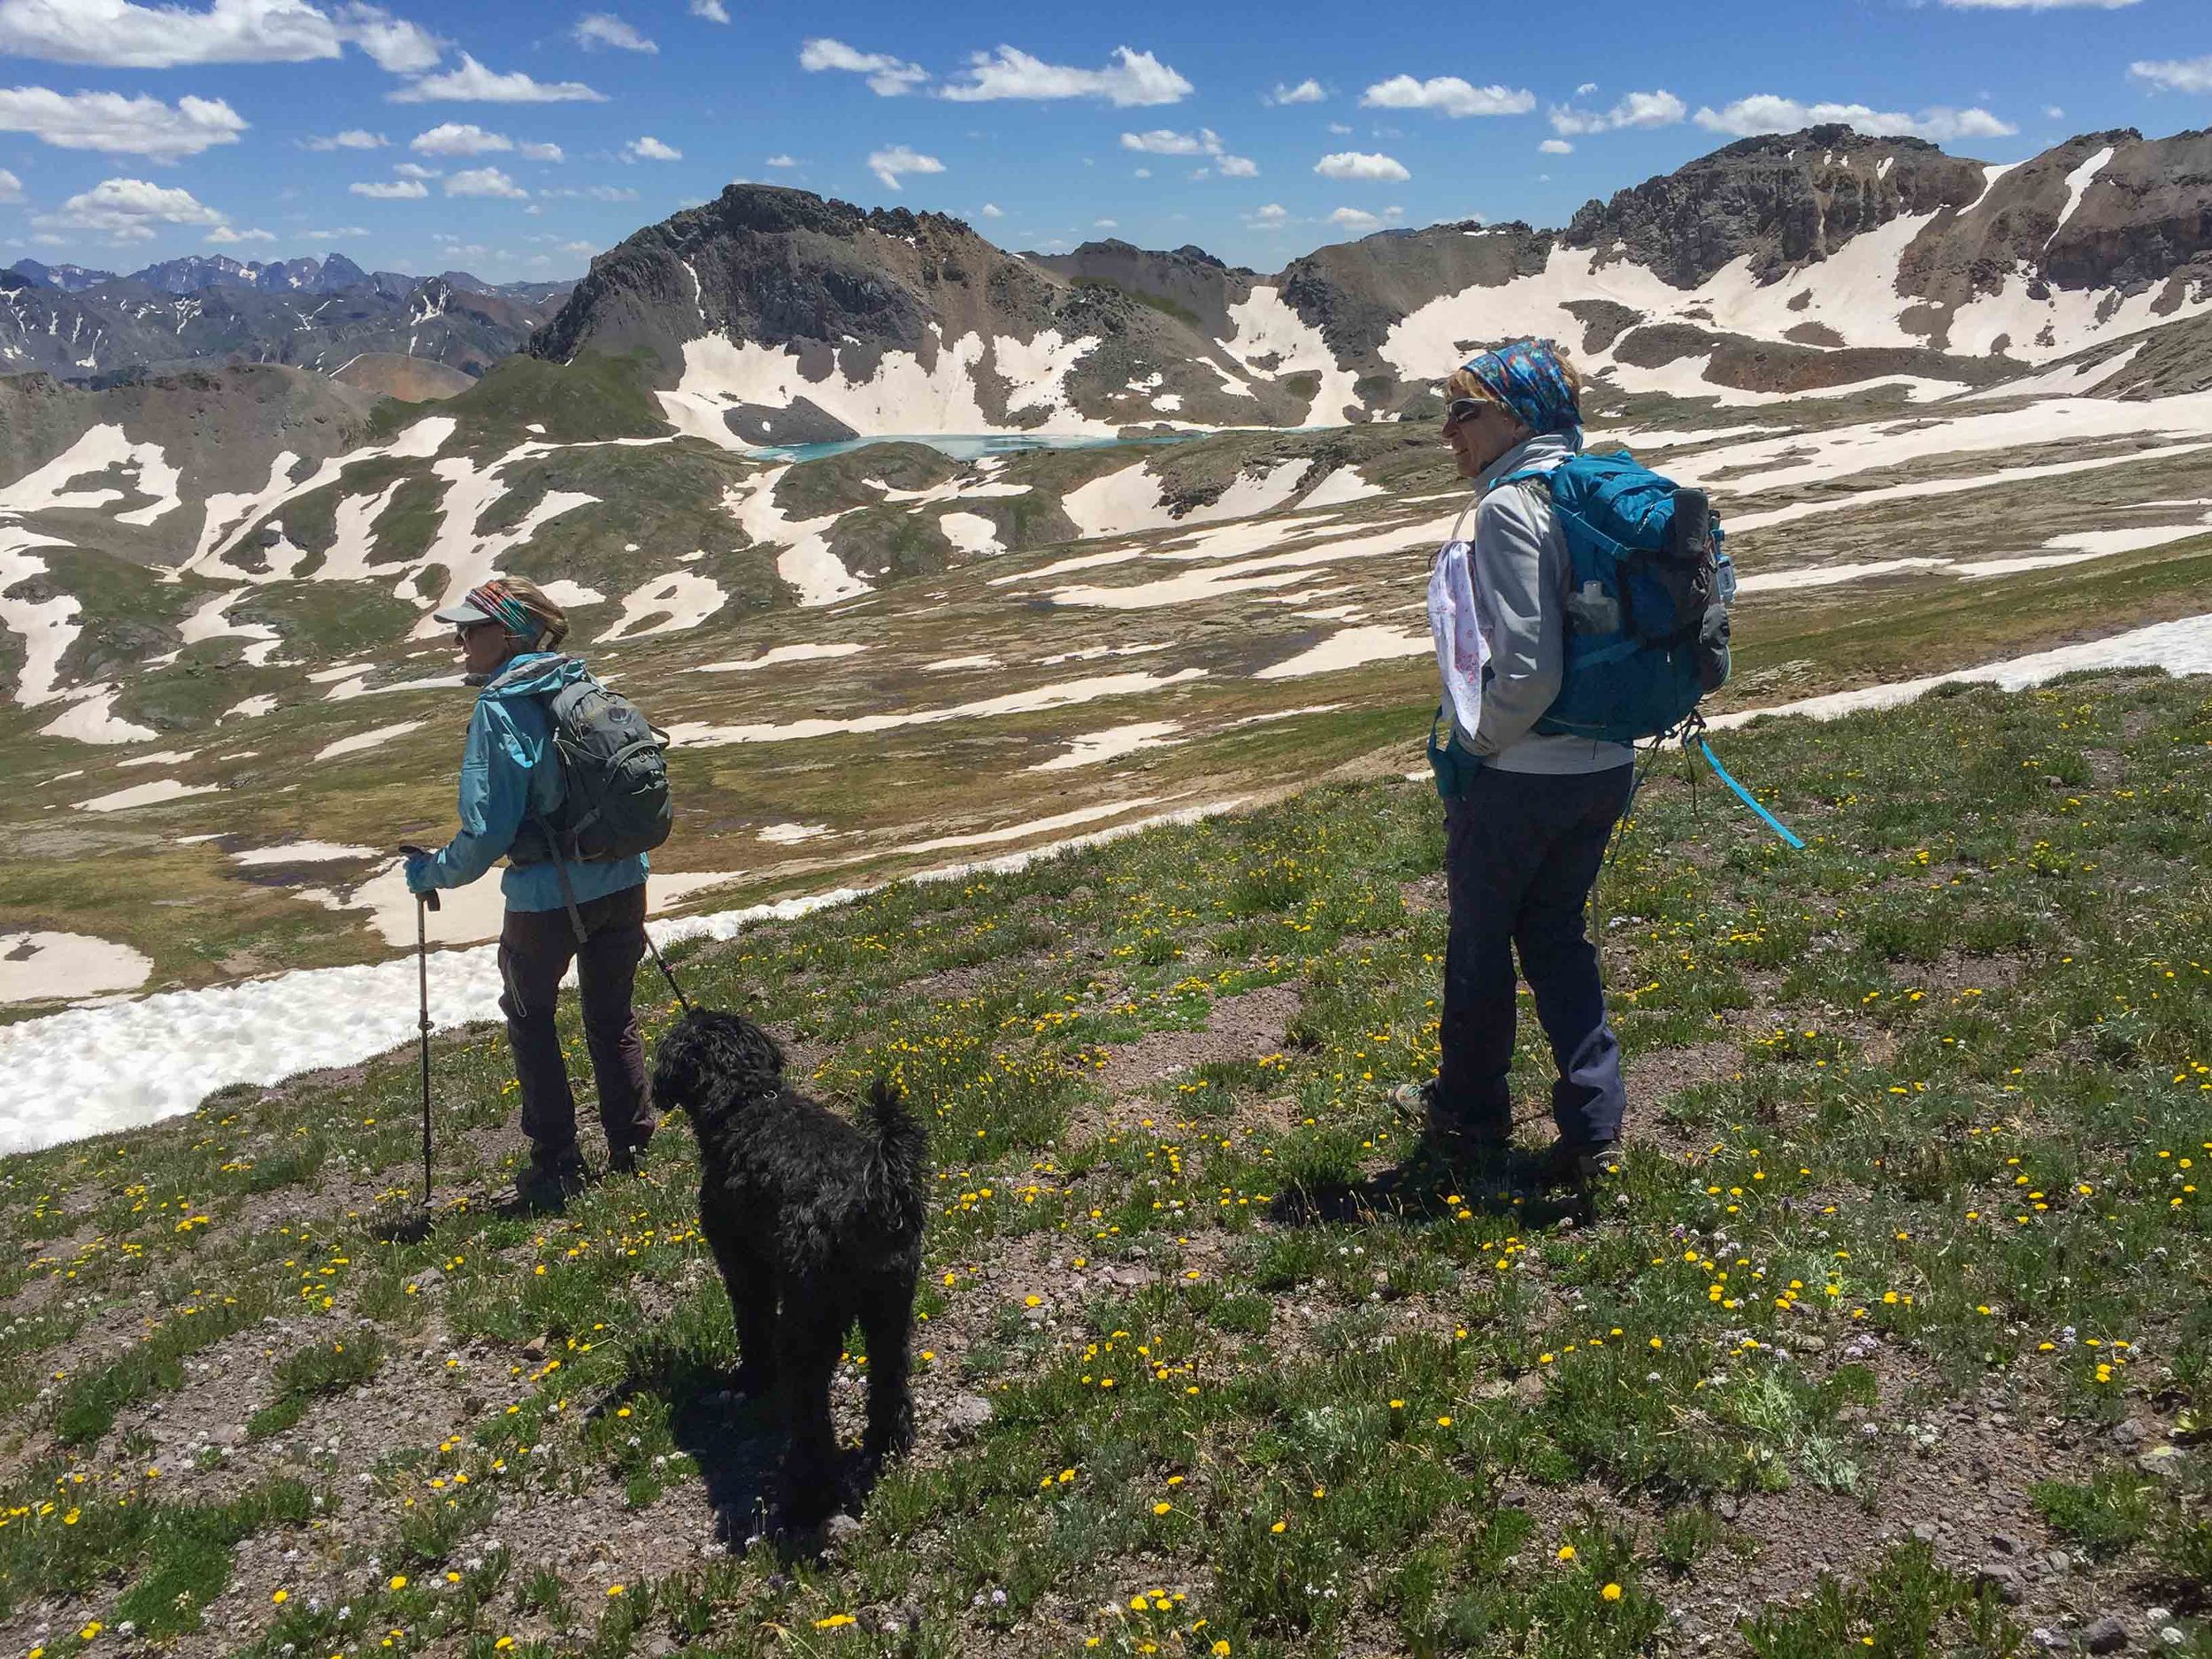 Penny, Jane Marie and Bella start the hike down from Columbine Pass-Columbine Lake in the distance